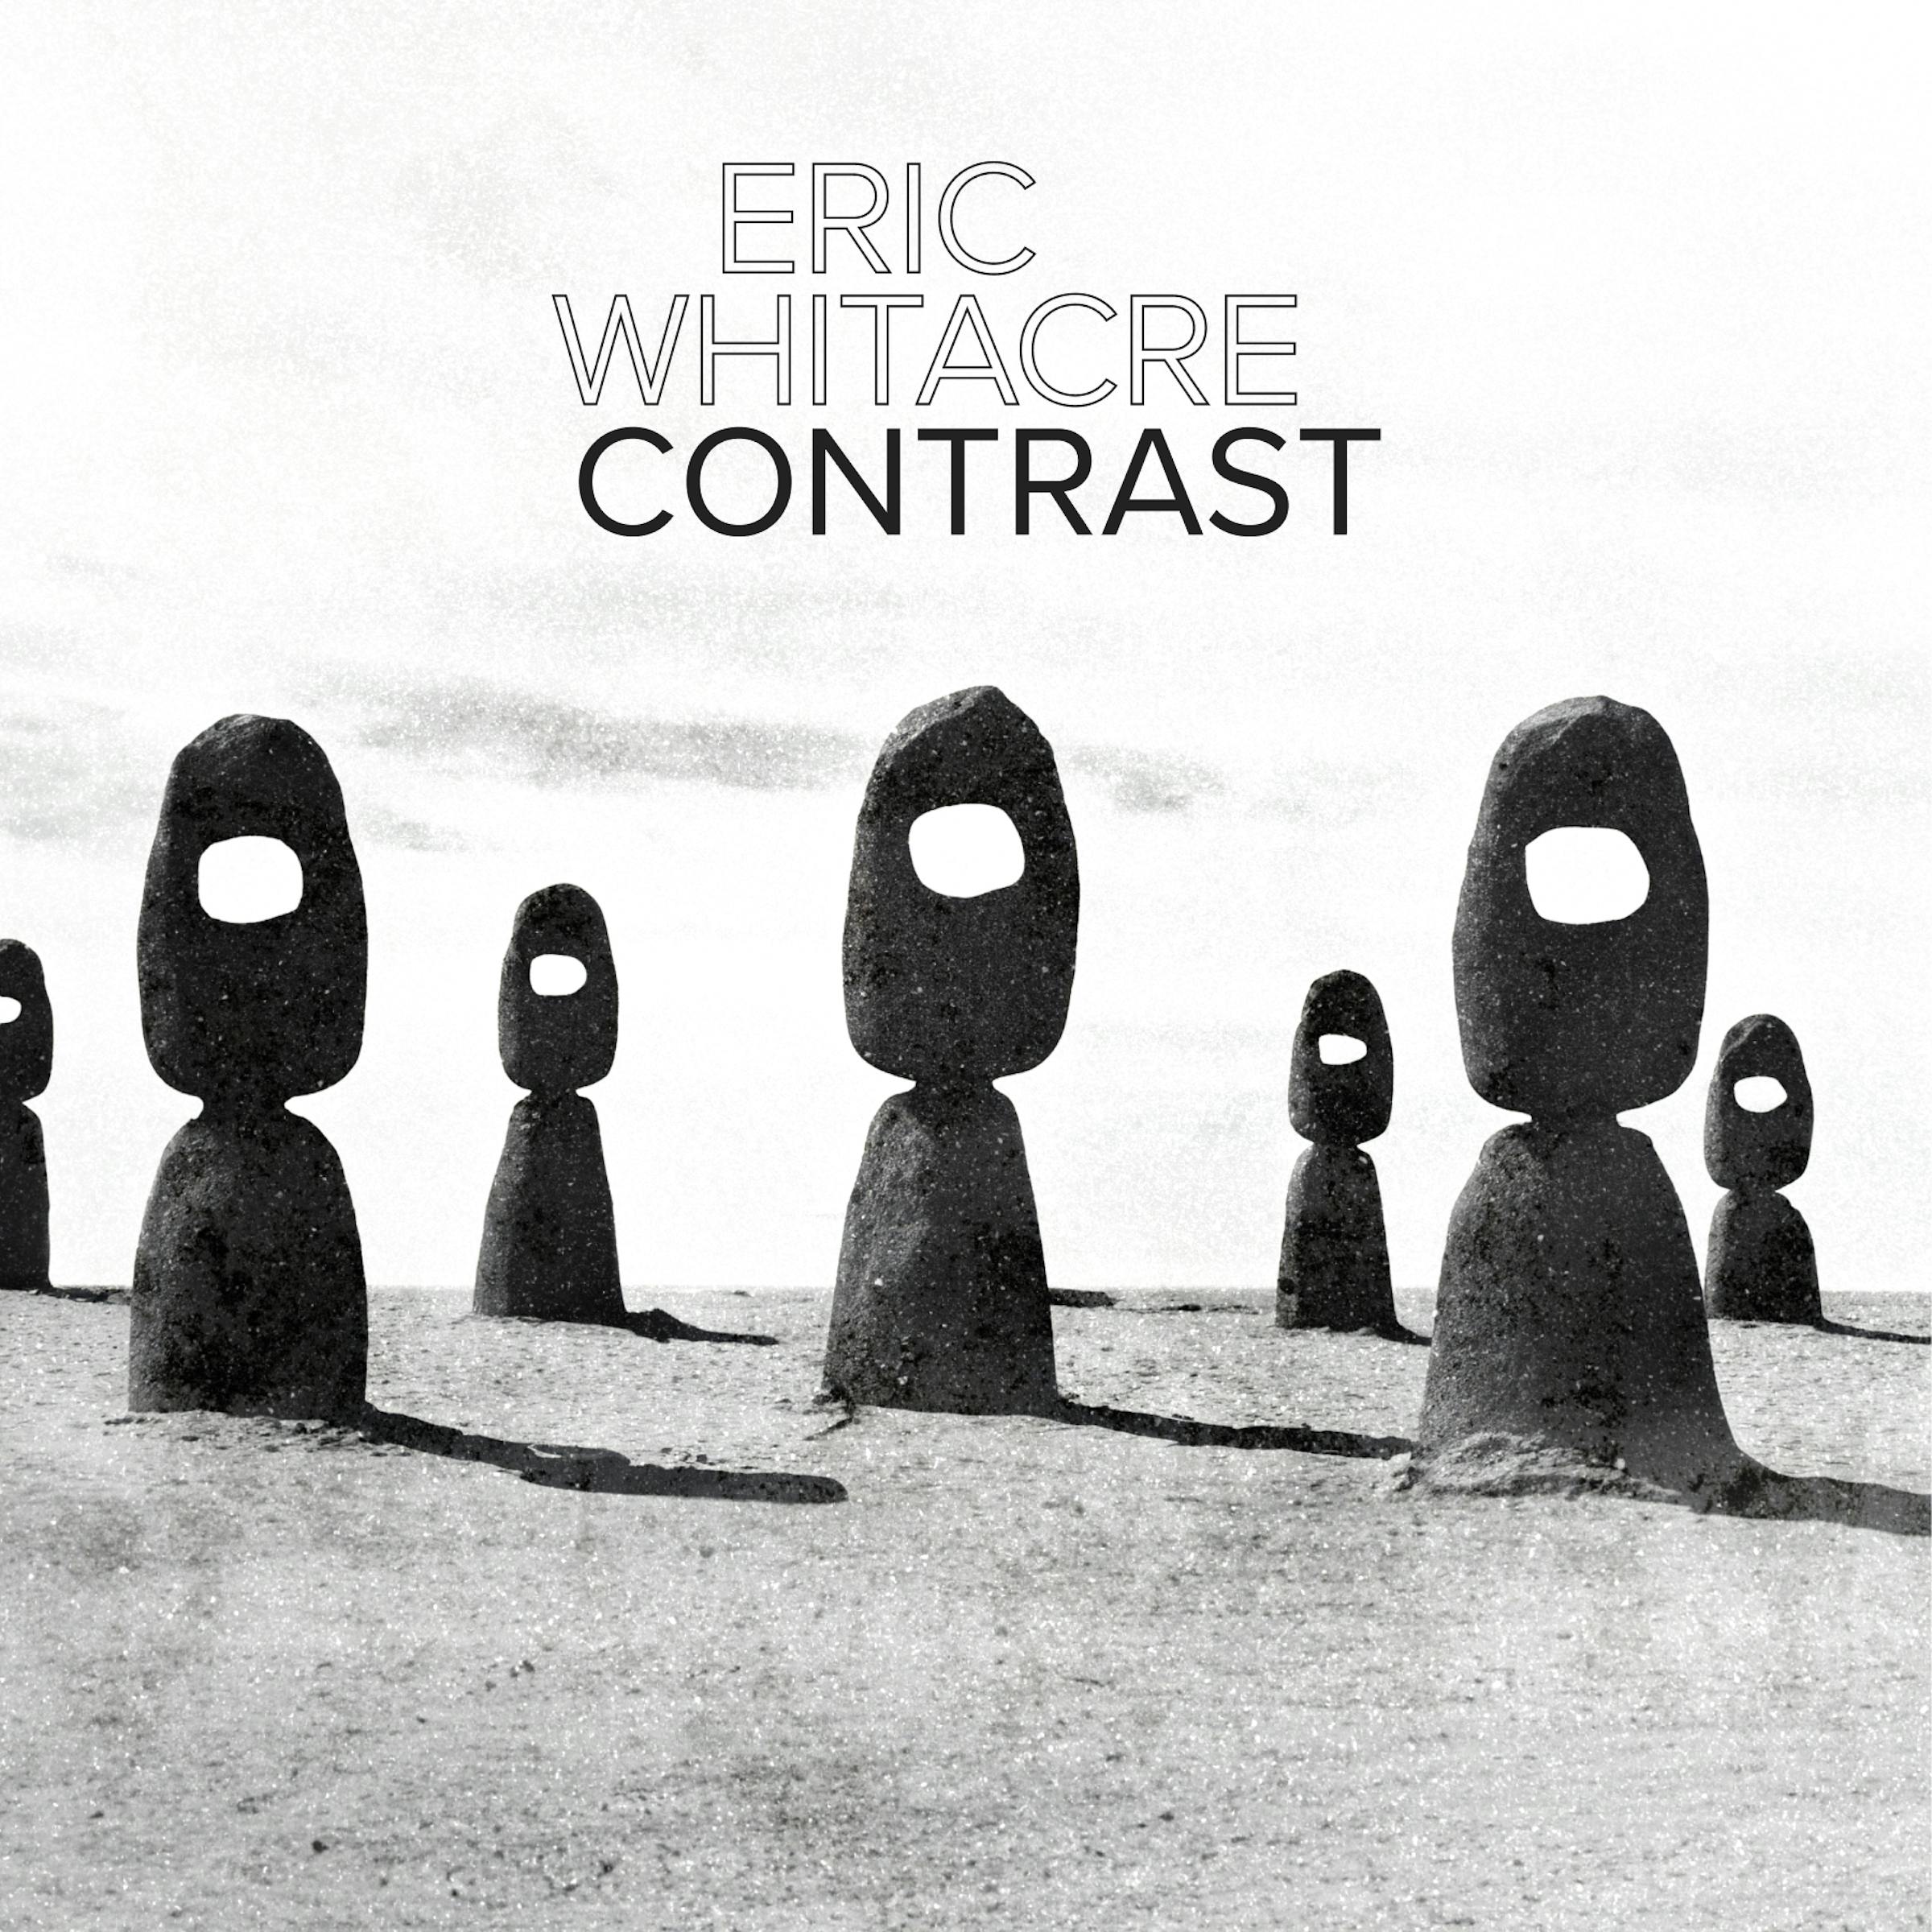 Eric Whitacre Contrast artwork. Creepy black stone totems in a field.